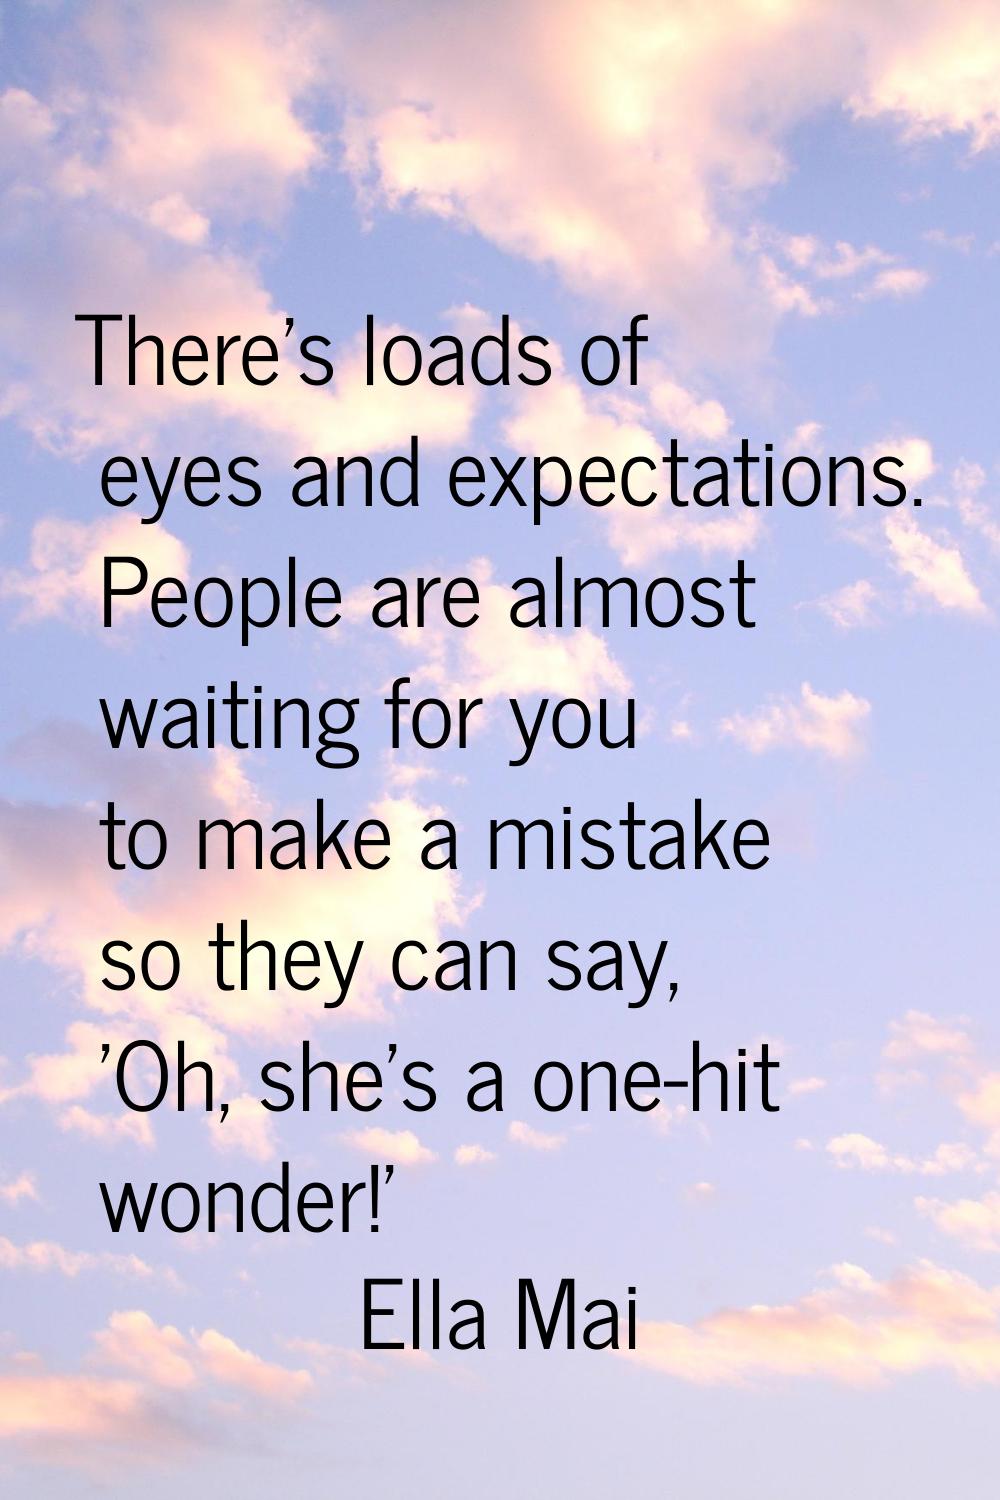 There's loads of eyes and expectations. People are almost waiting for you to make a mistake so they